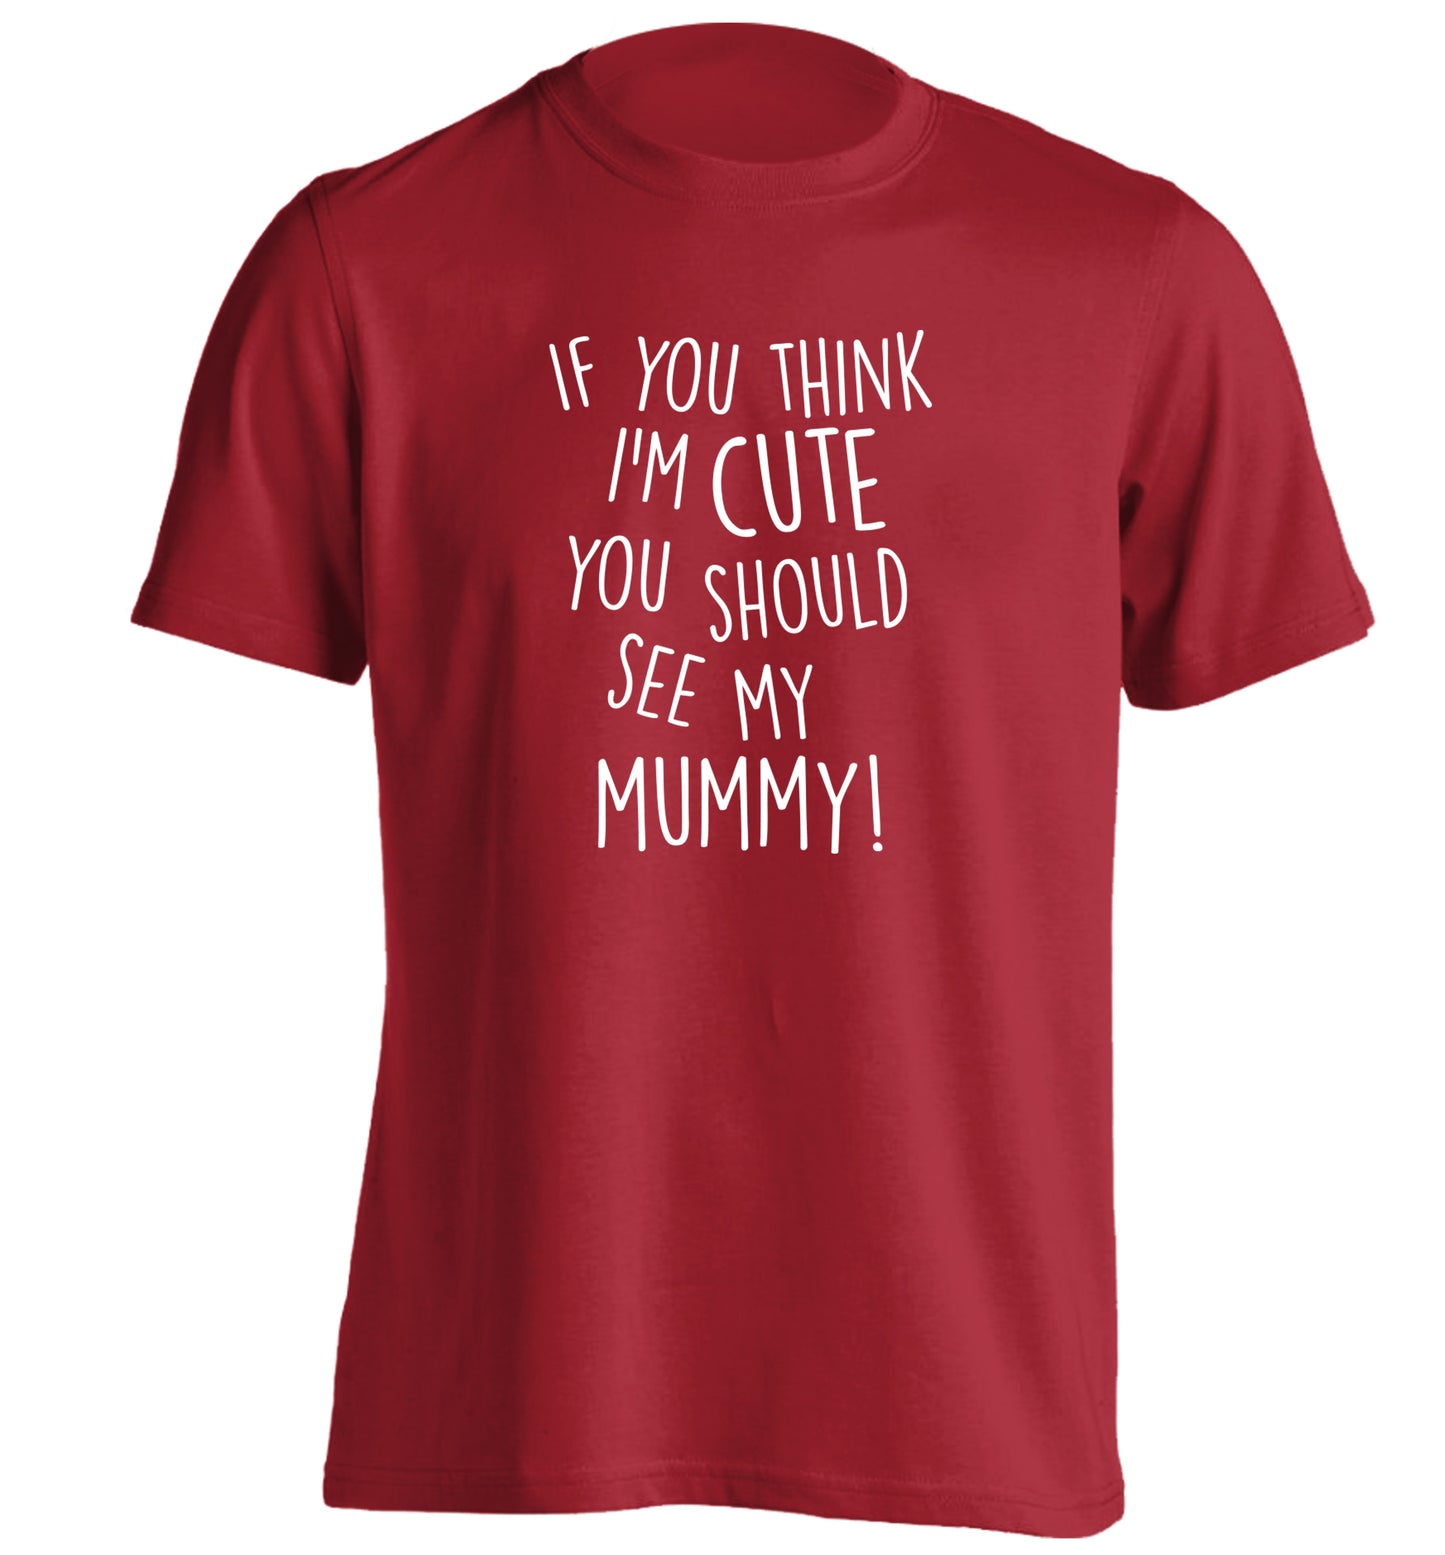 If you think I'm cute you should see my mummy adults unisex red Tshirt 2XL